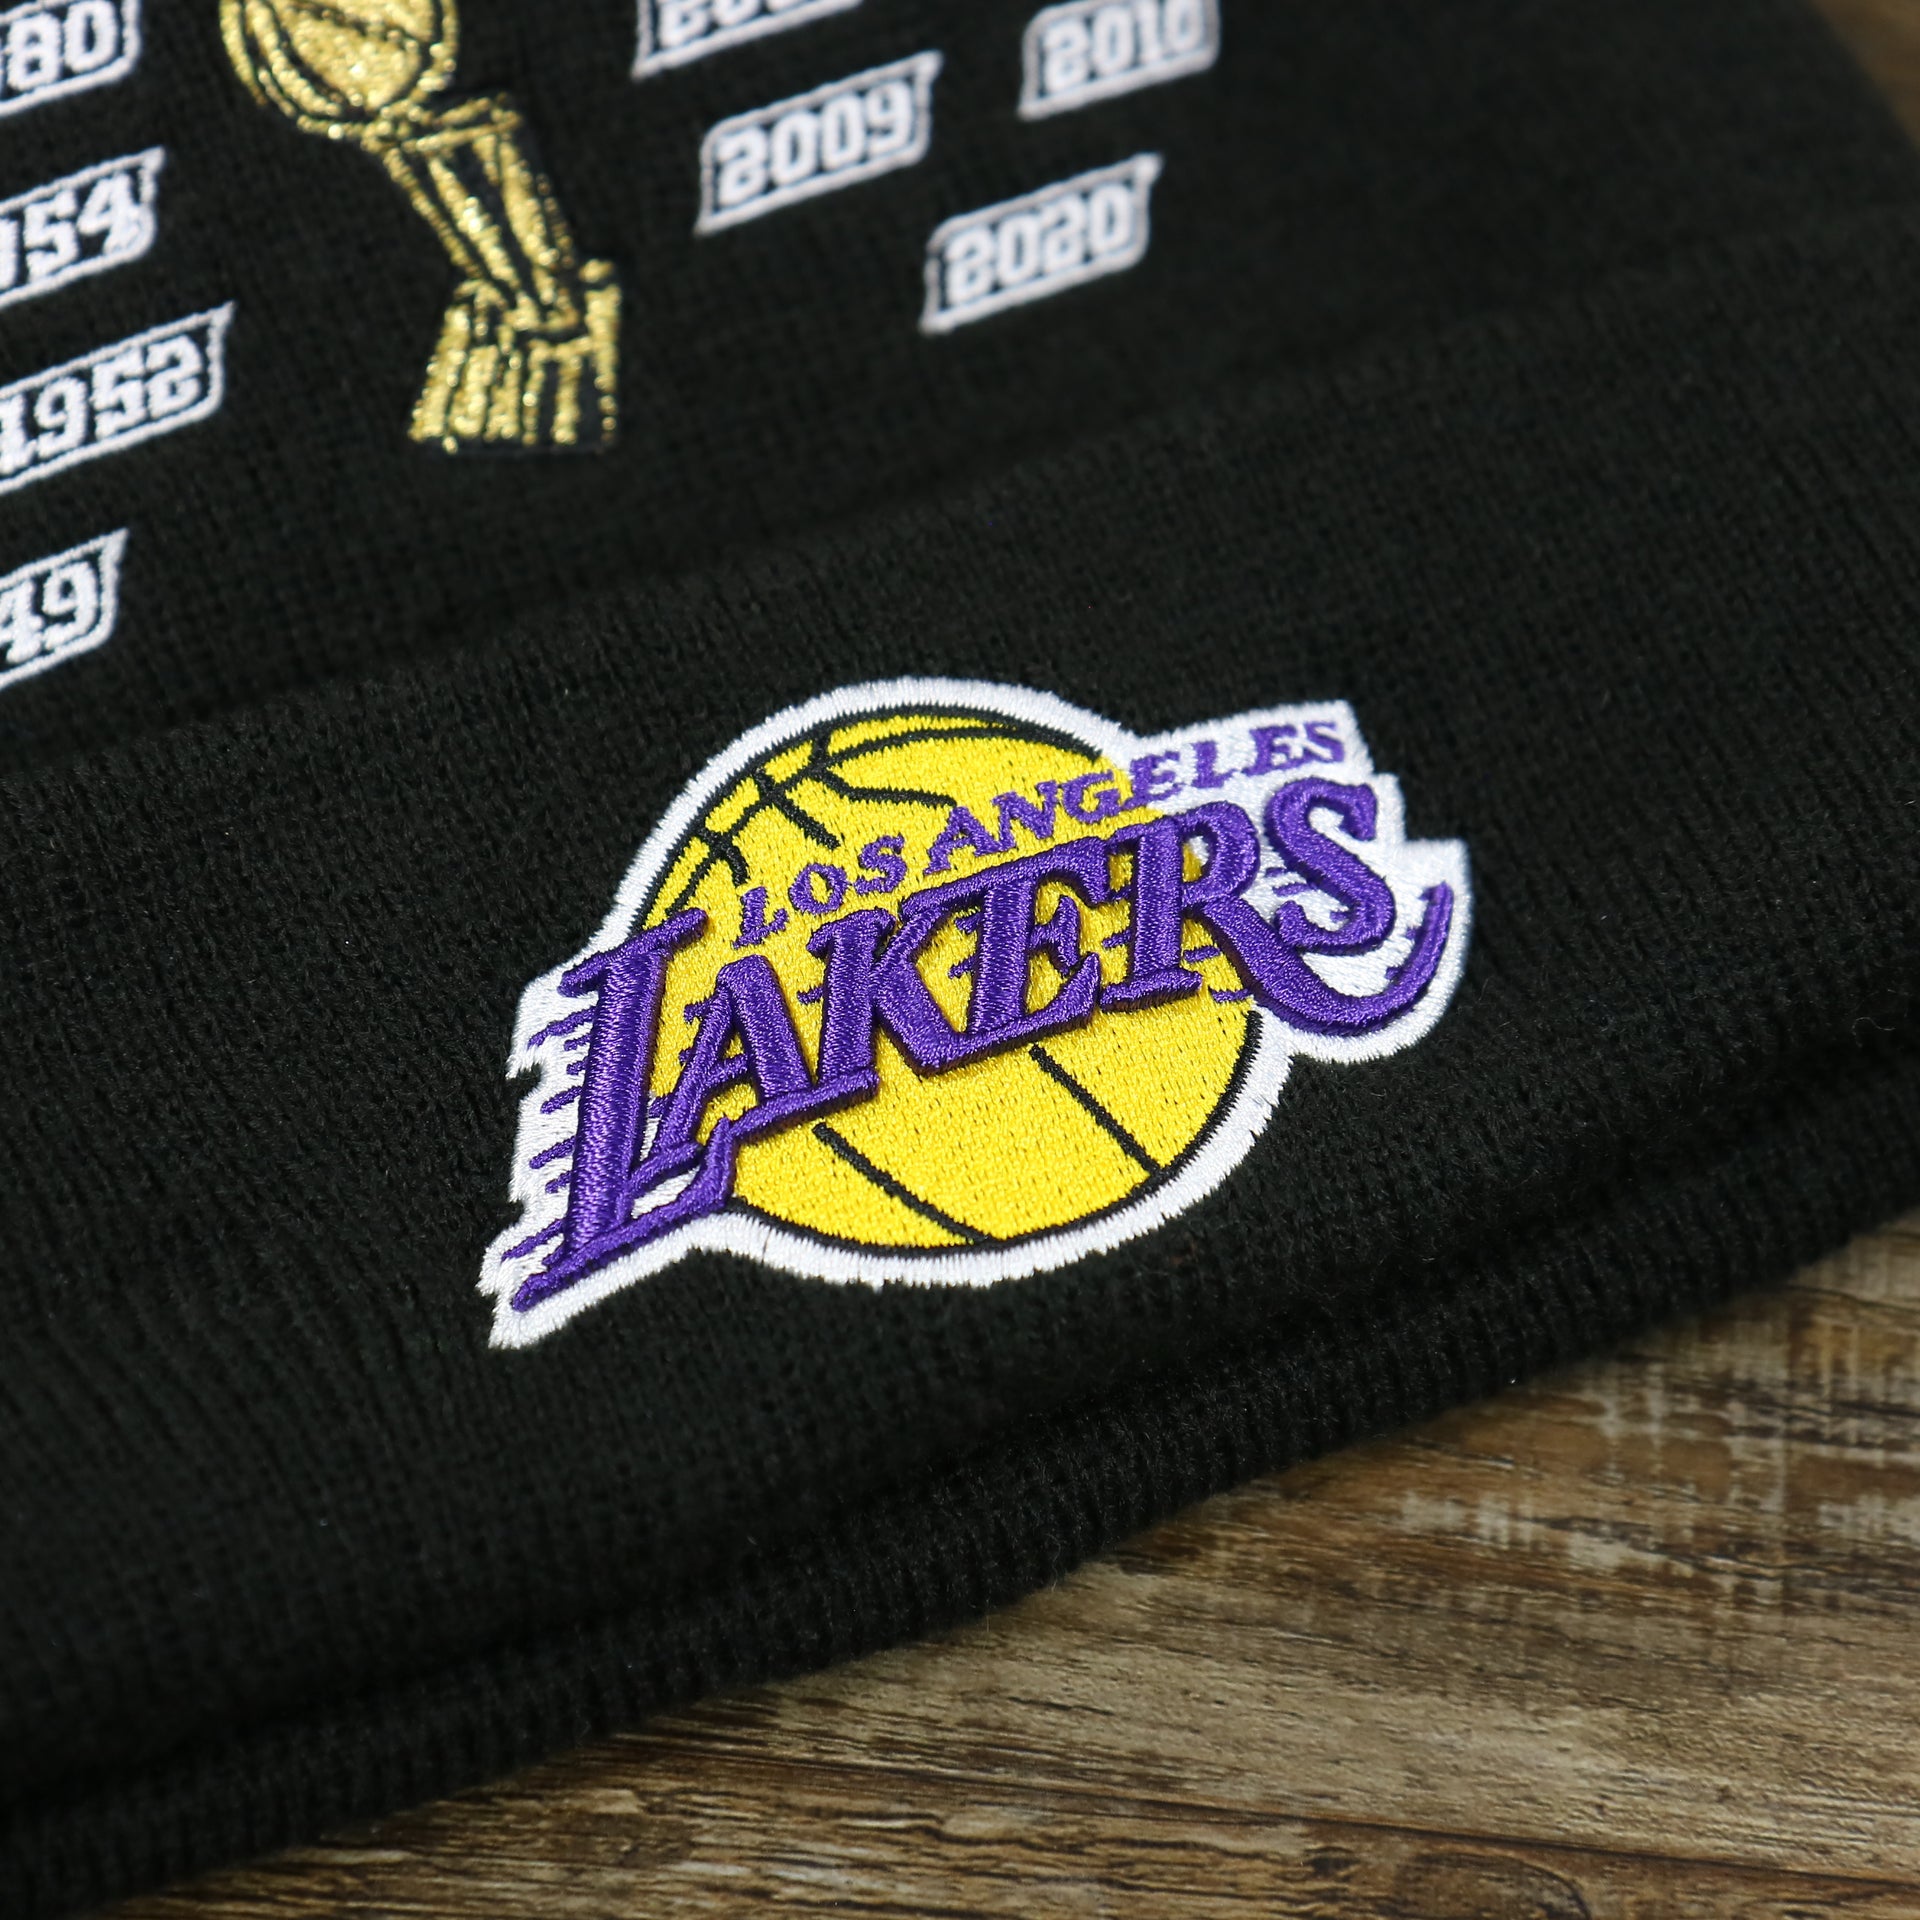 The Los Angeles Lakers Logo on the Los Angeles Lakers All Over NBA Finals Side Patch 17x Champion Knit Cuff Beanie | New Era, Black